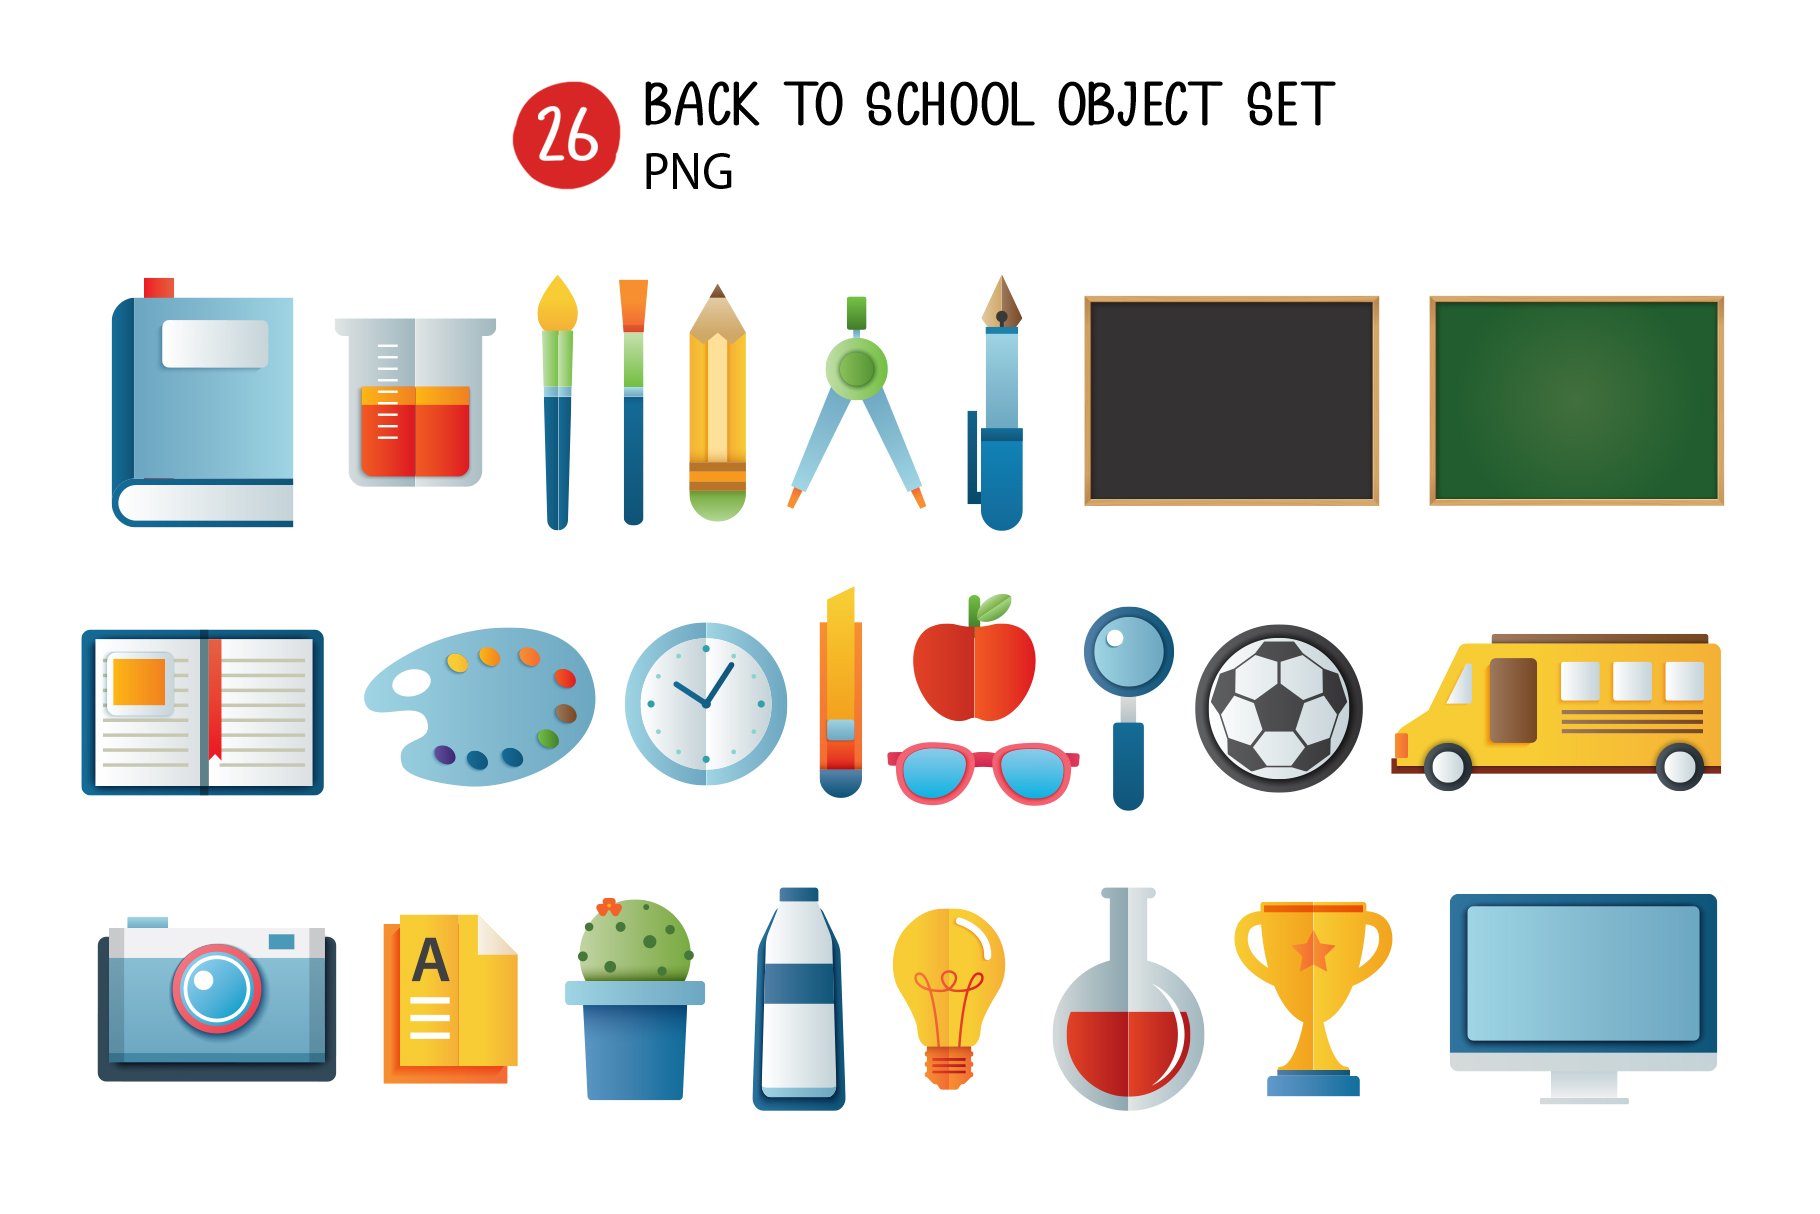 Back to School Object Set. cover image.